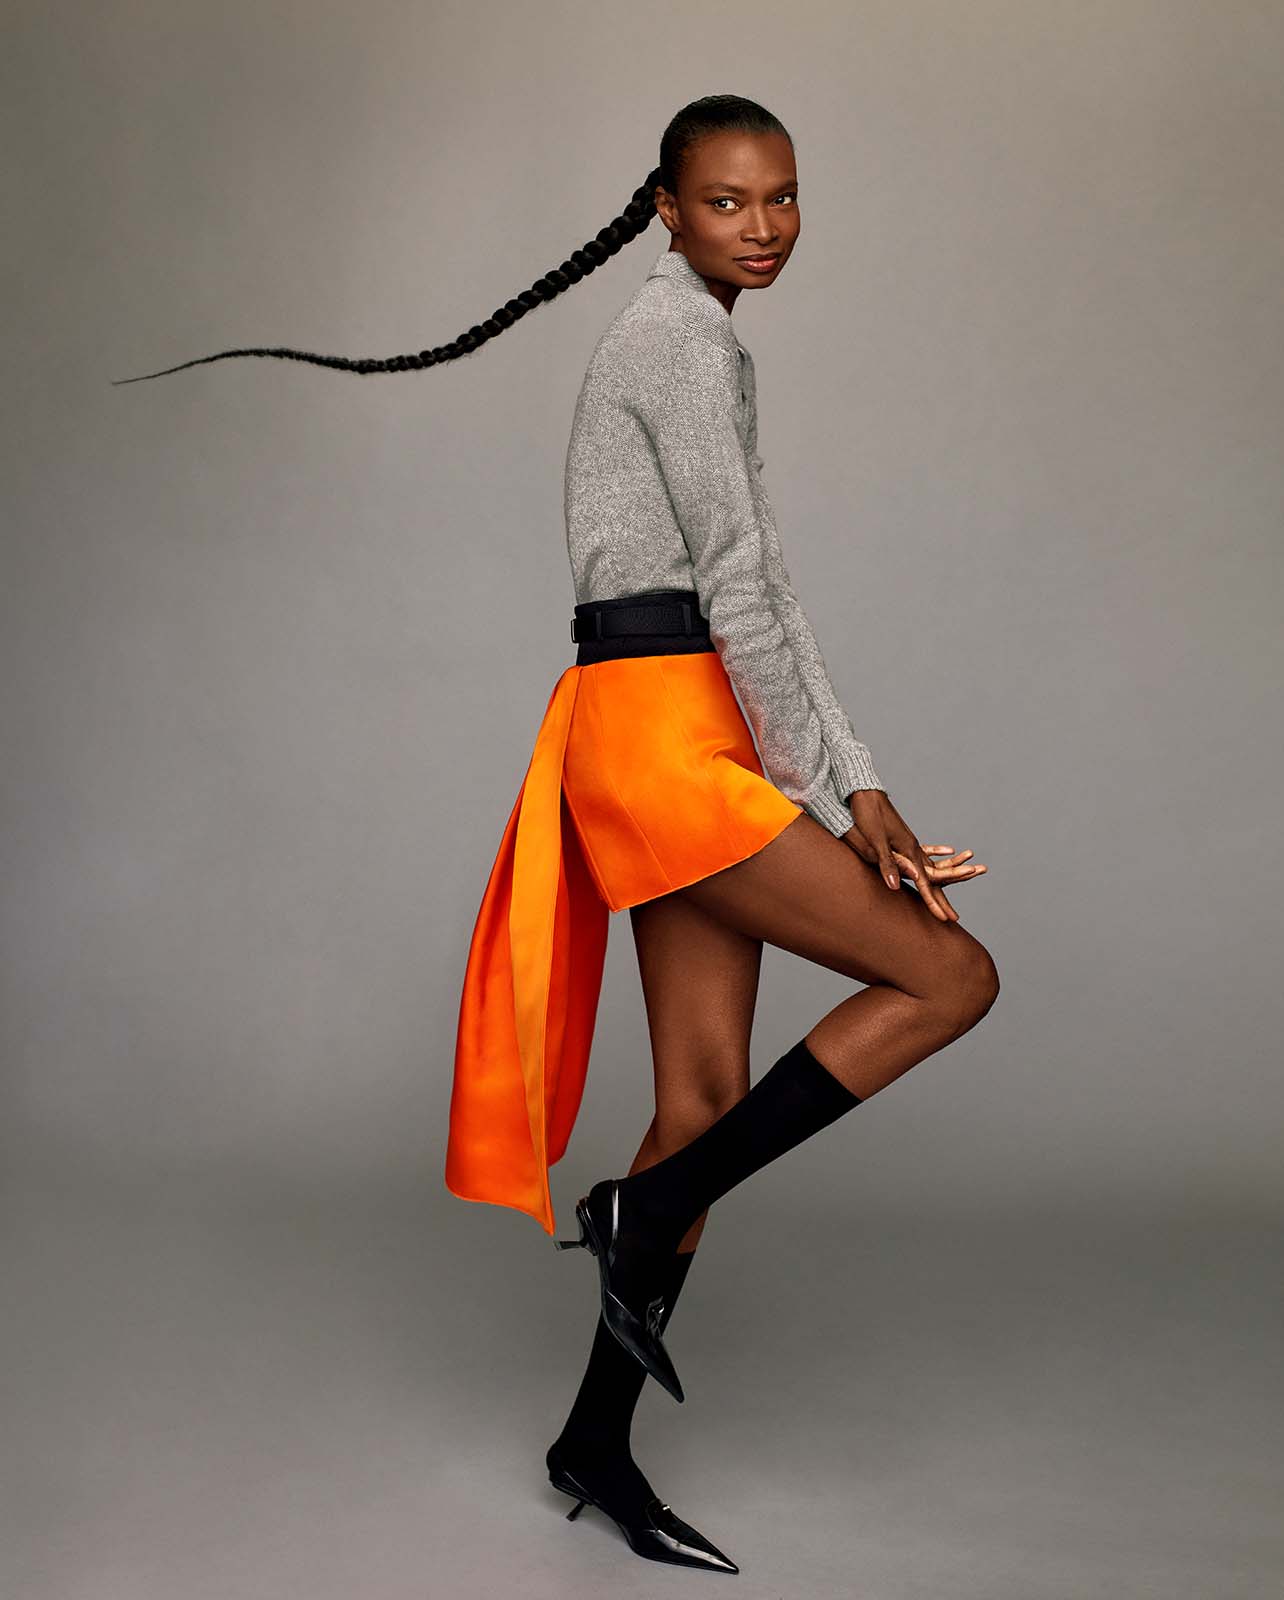 Model poses in a grey sweater and orange skirt, black high socks and heels